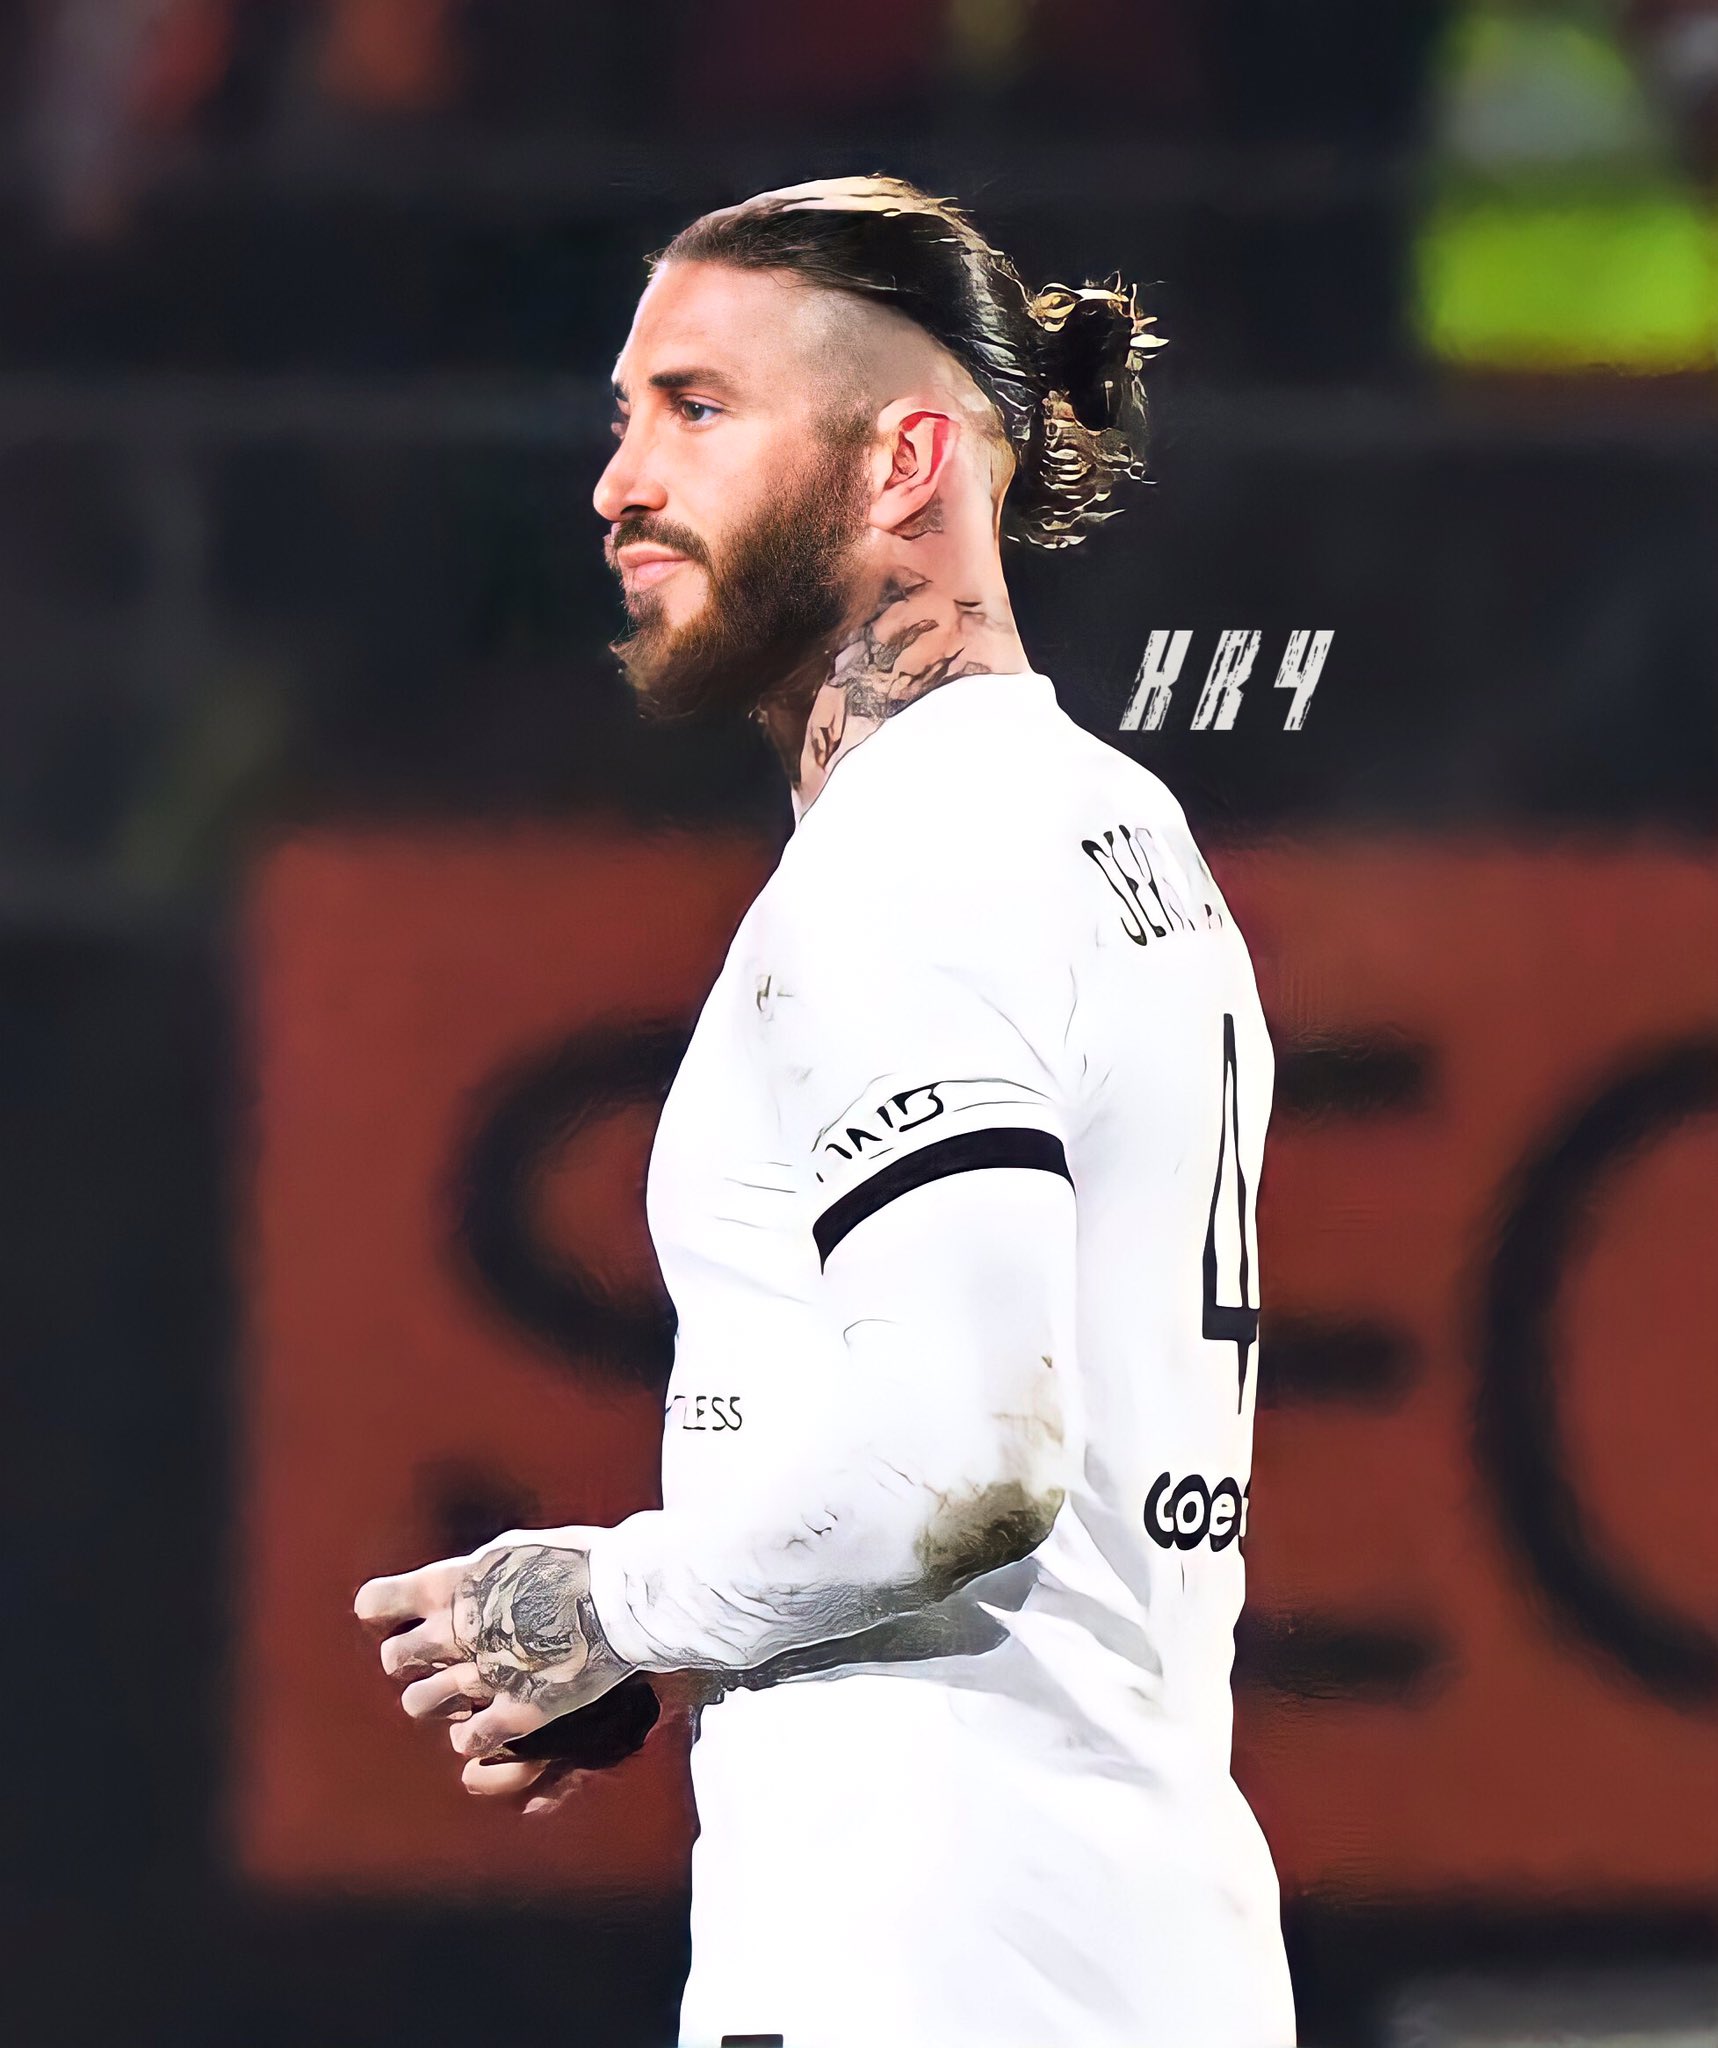 Learn 92+ about sergio ramos neck tattoo latest .vn